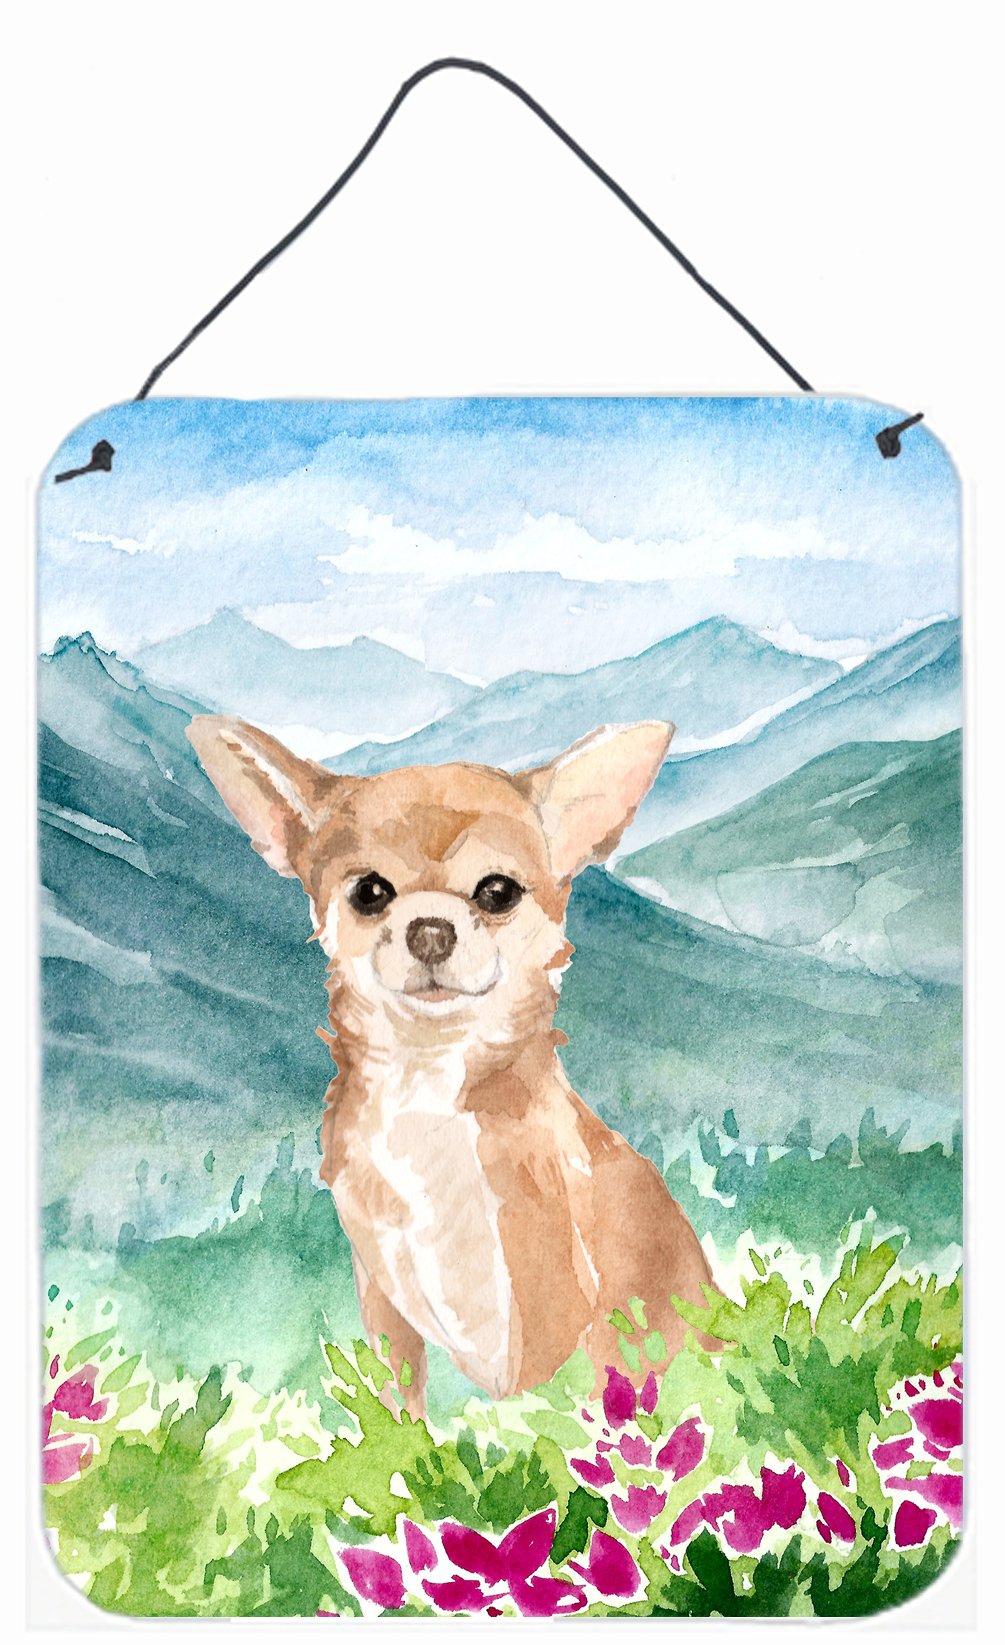 Mountian Flowers Chihuahua Wall or Door Hanging Prints CK1983DS1216 by Caroline's Treasures